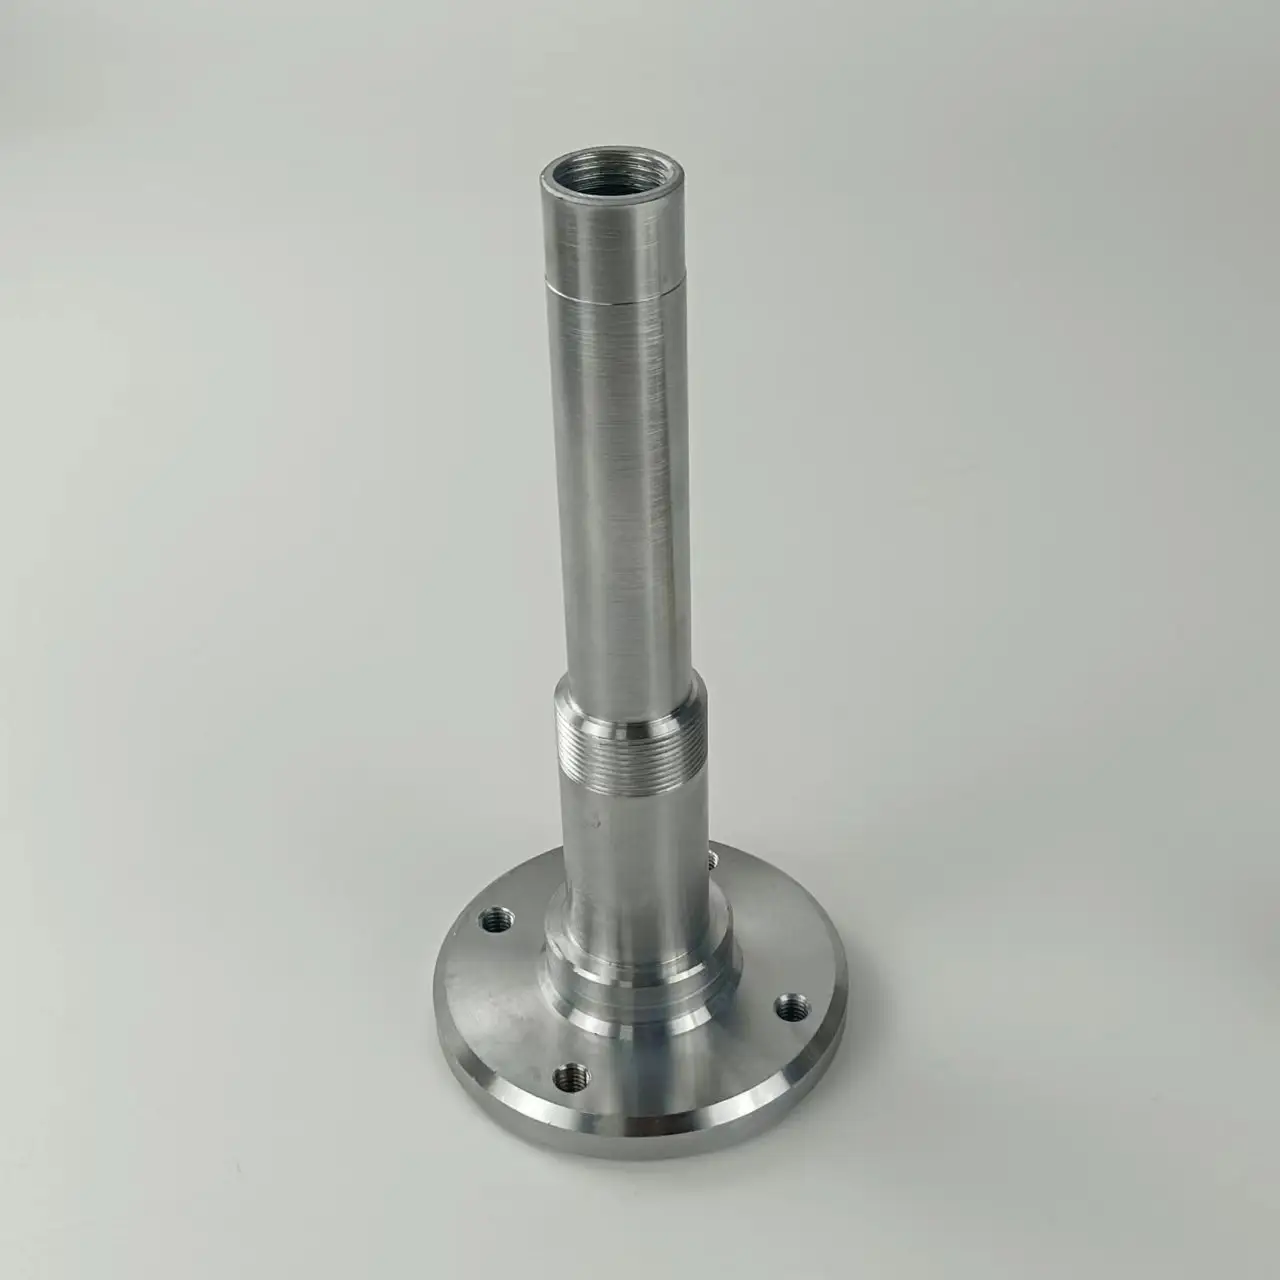 High Quality Cnc Precision Metal Parts Cnc Machining Services Fabrication with Competitive Price